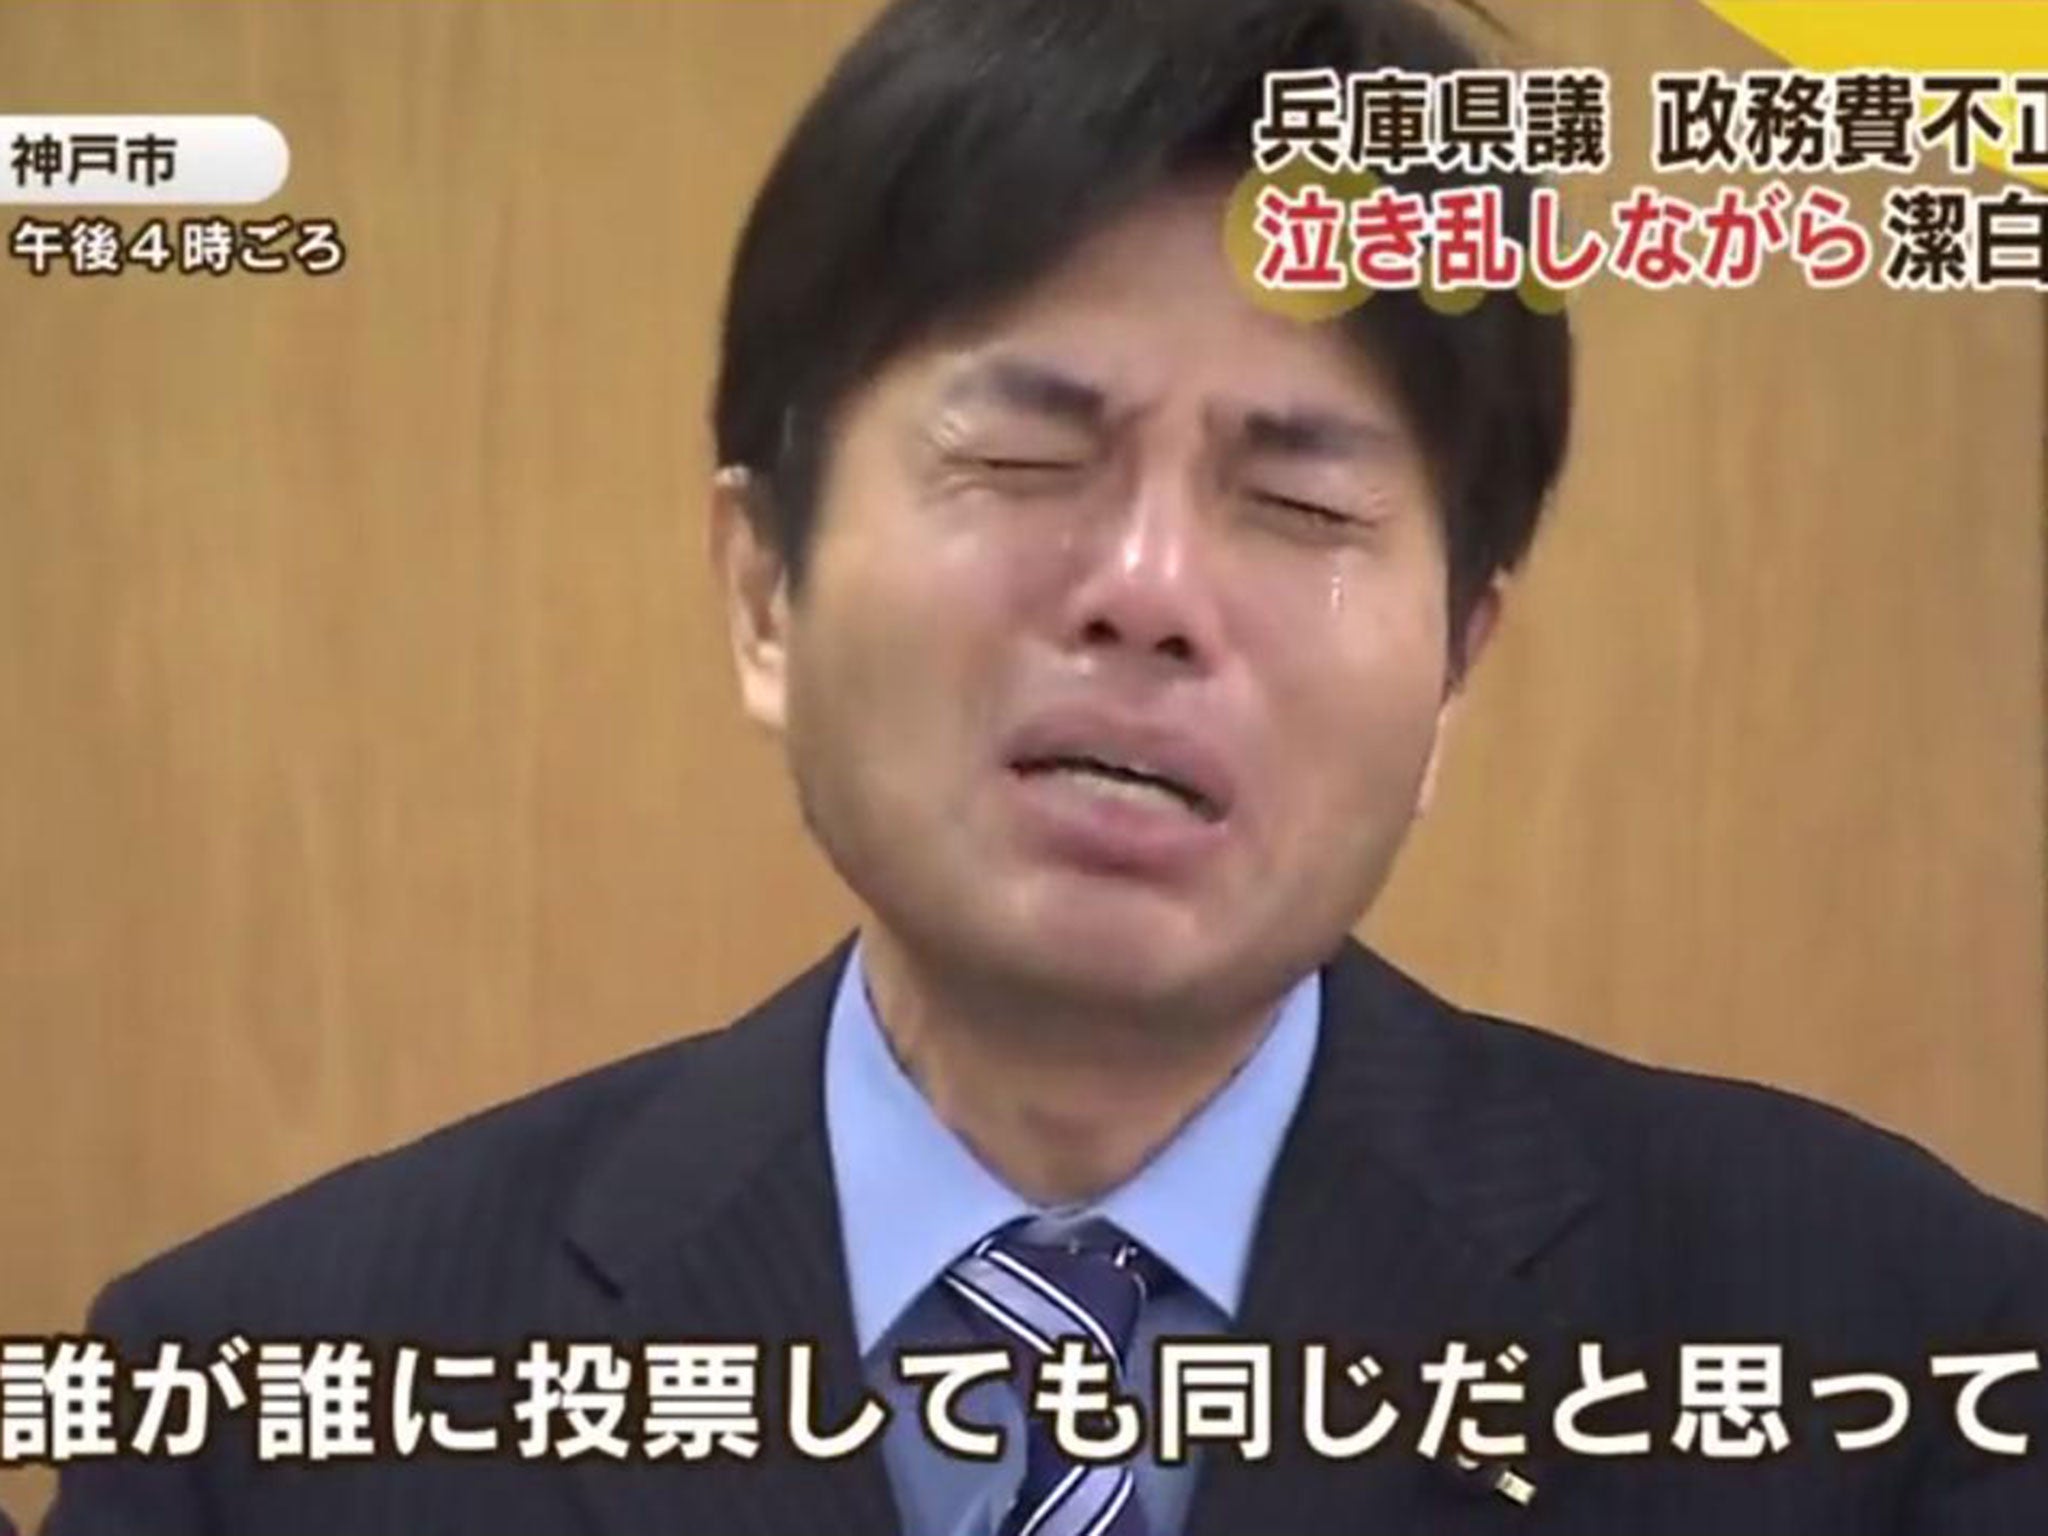 Video footage of a Japanese politician who claimed 3 million yen (£172,300) on expenses defending his actions in a tear-filled, emotional rant has gone viral.